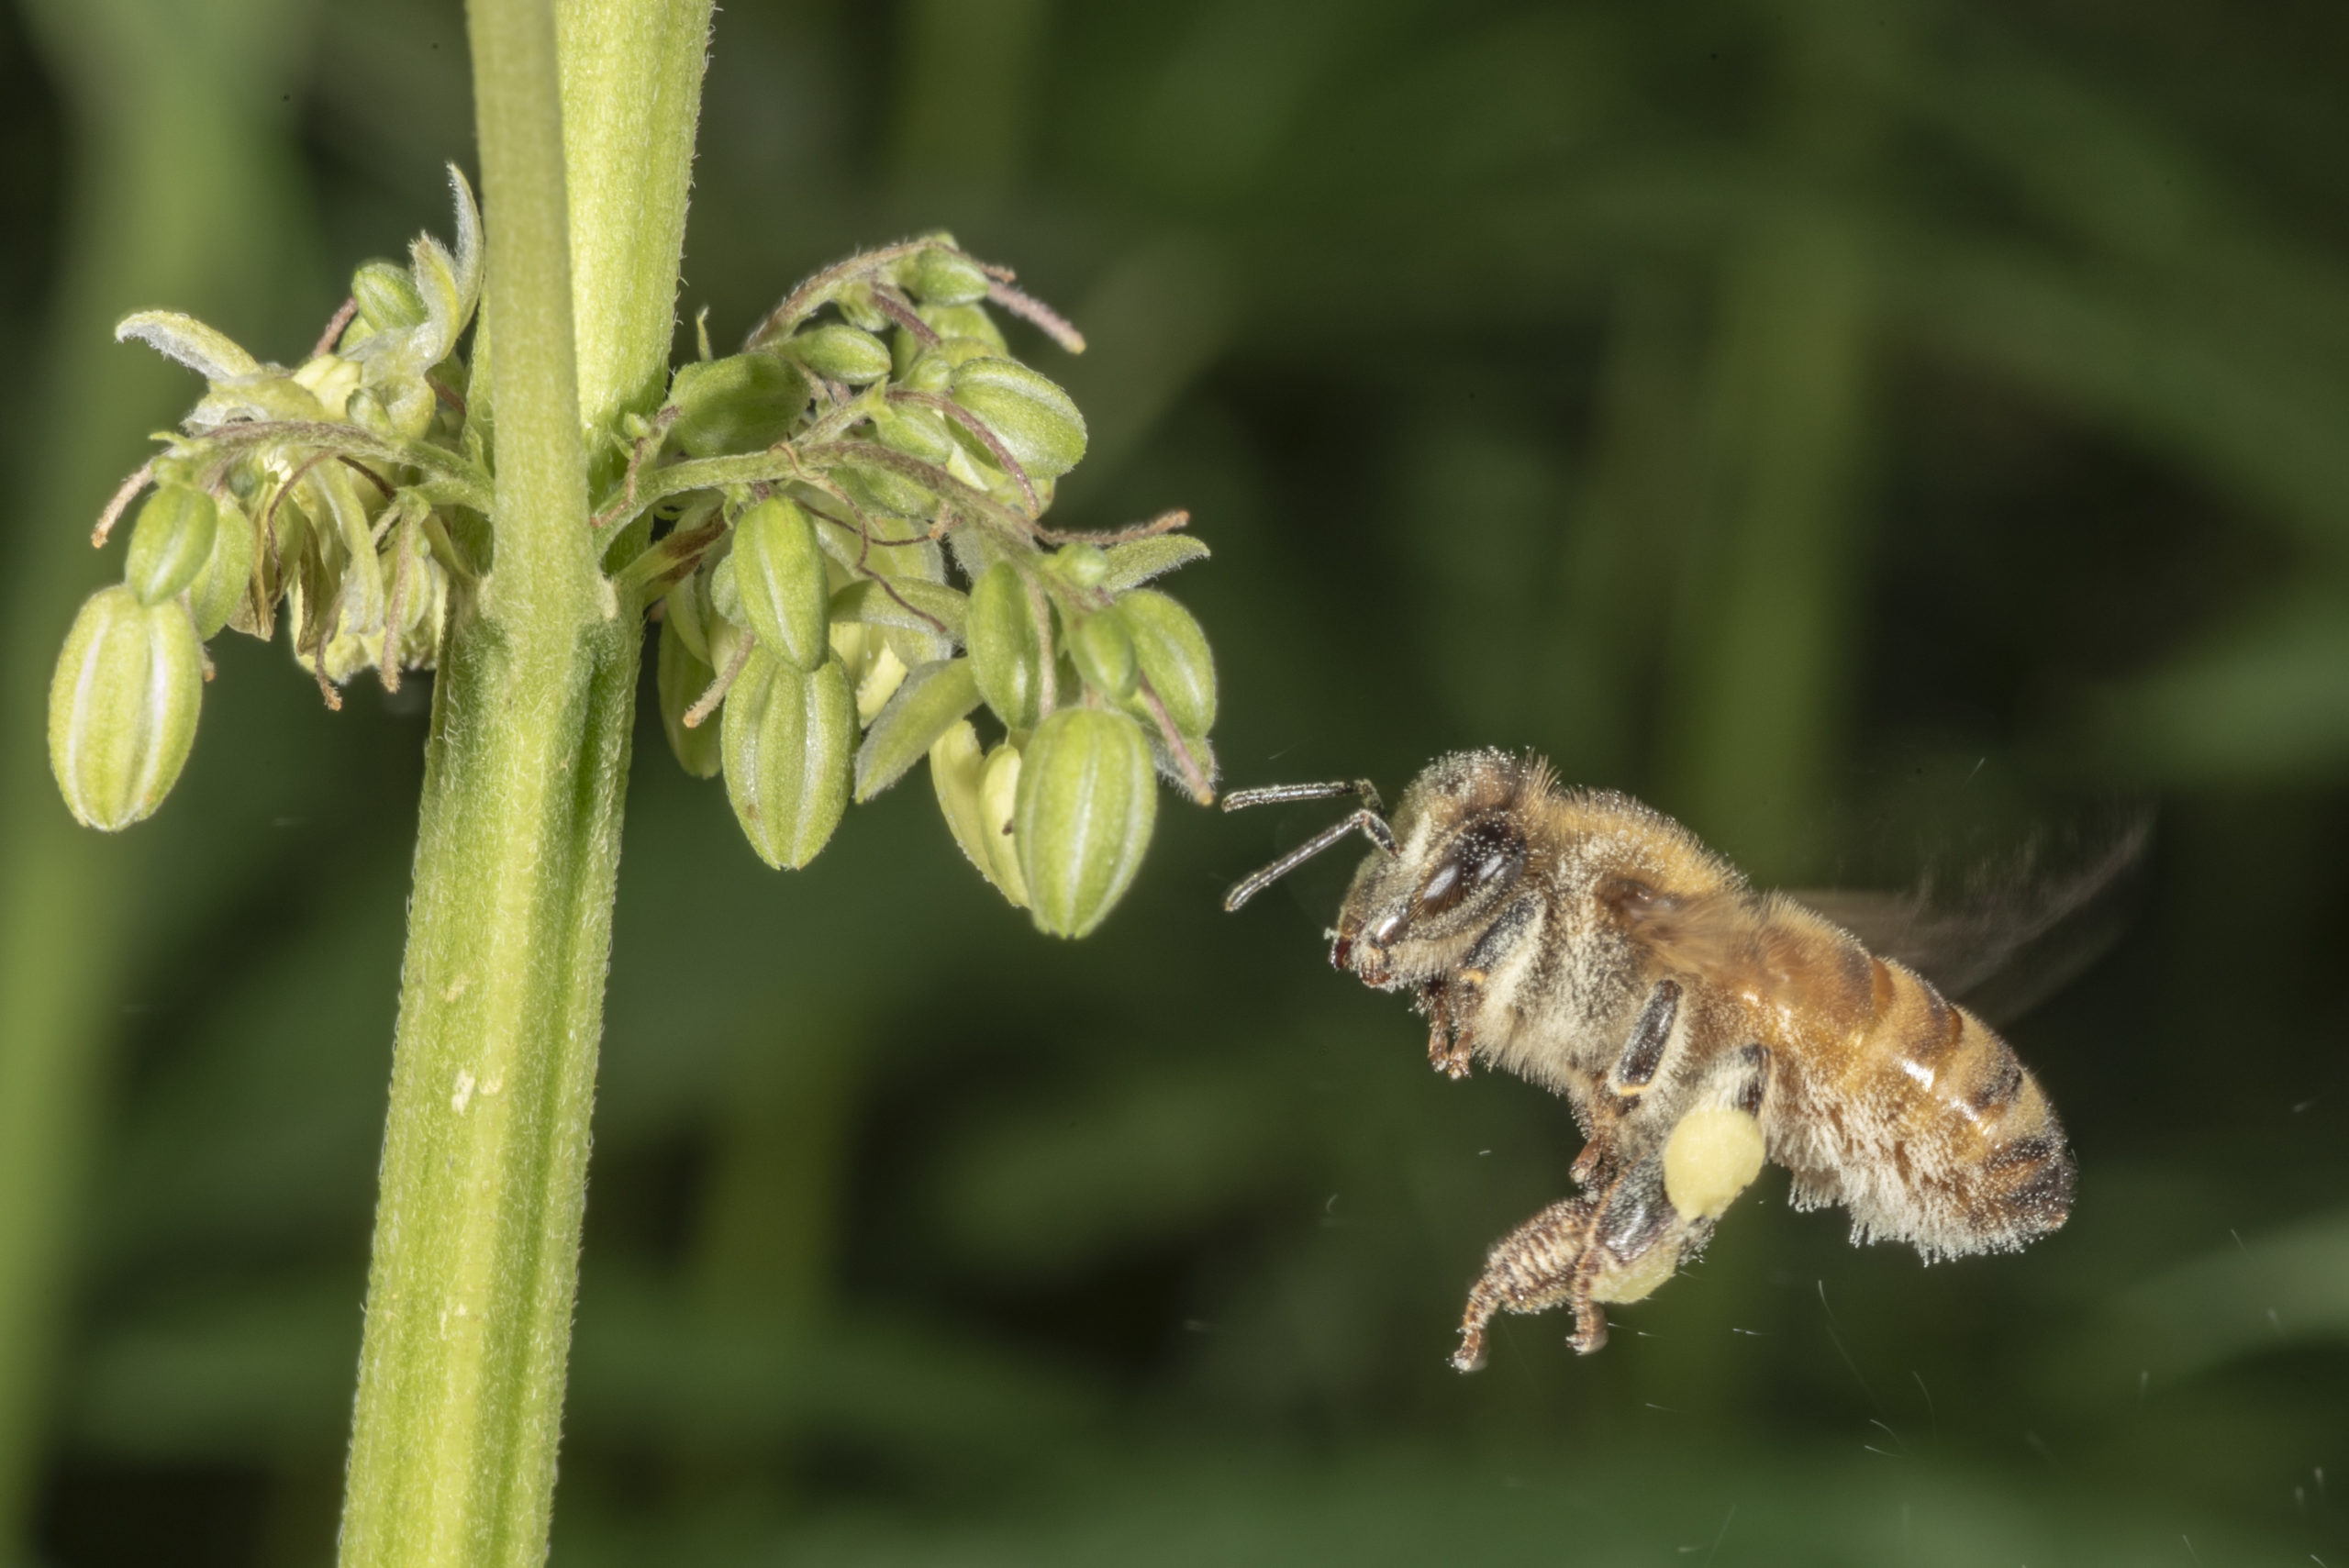 Image of a honey bee  approaching hemp plant's flowers